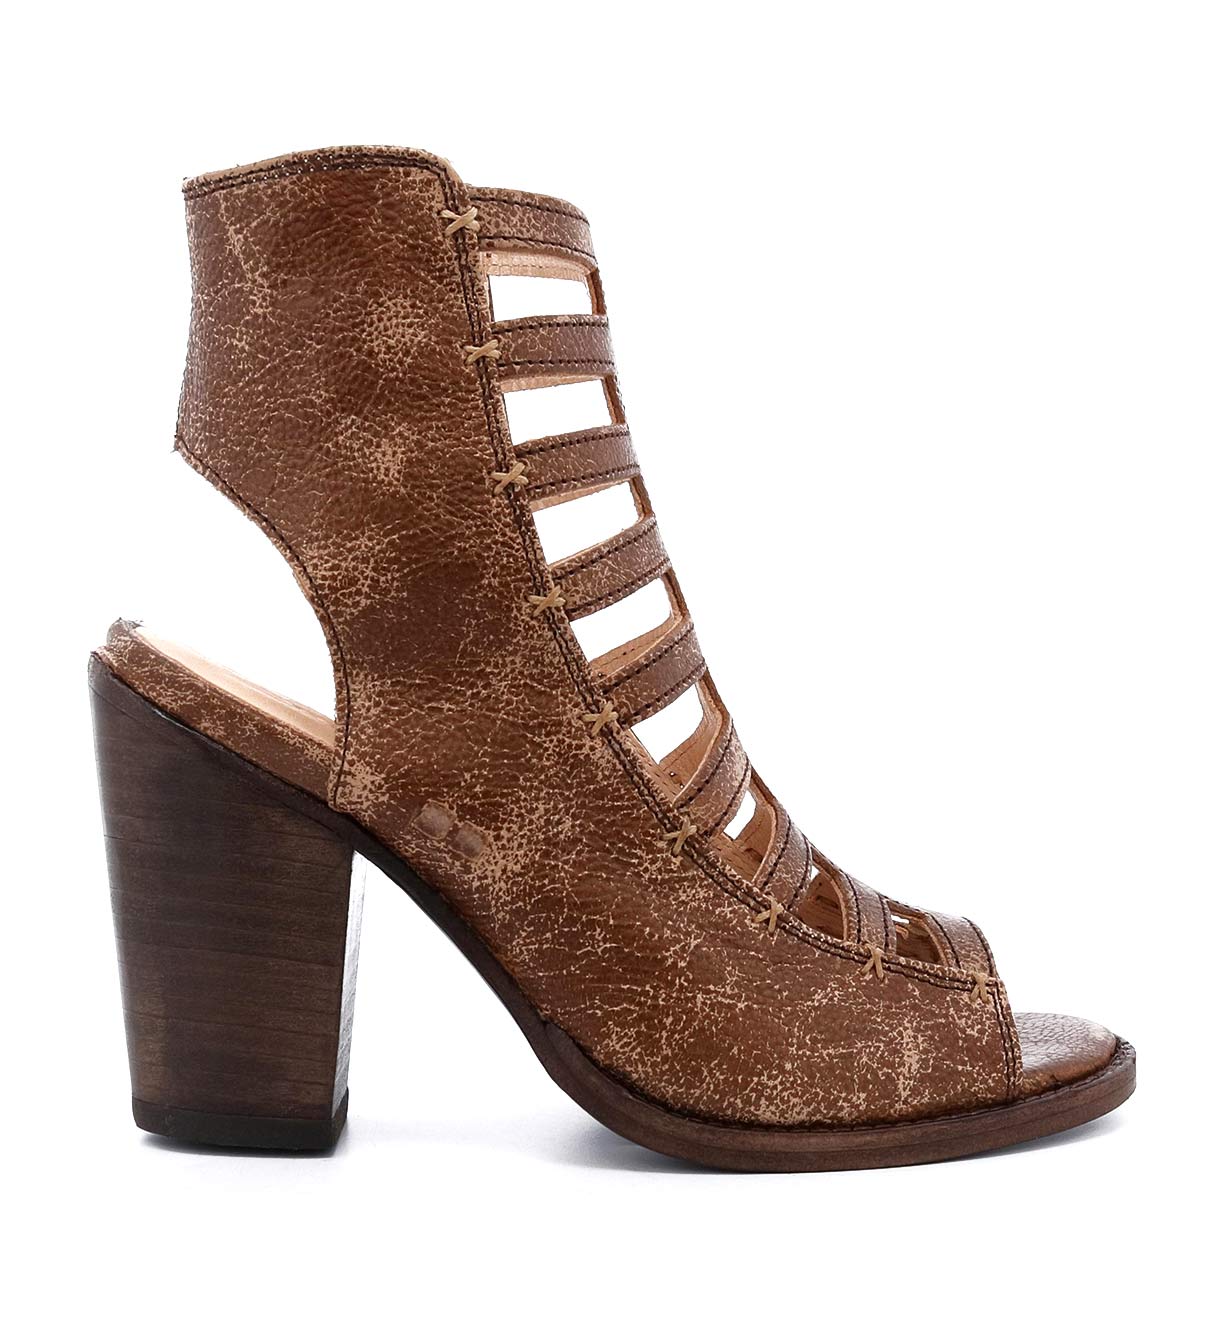 A women's brown high heeled Occam P sandal with a wooden heel by Bed Stu.